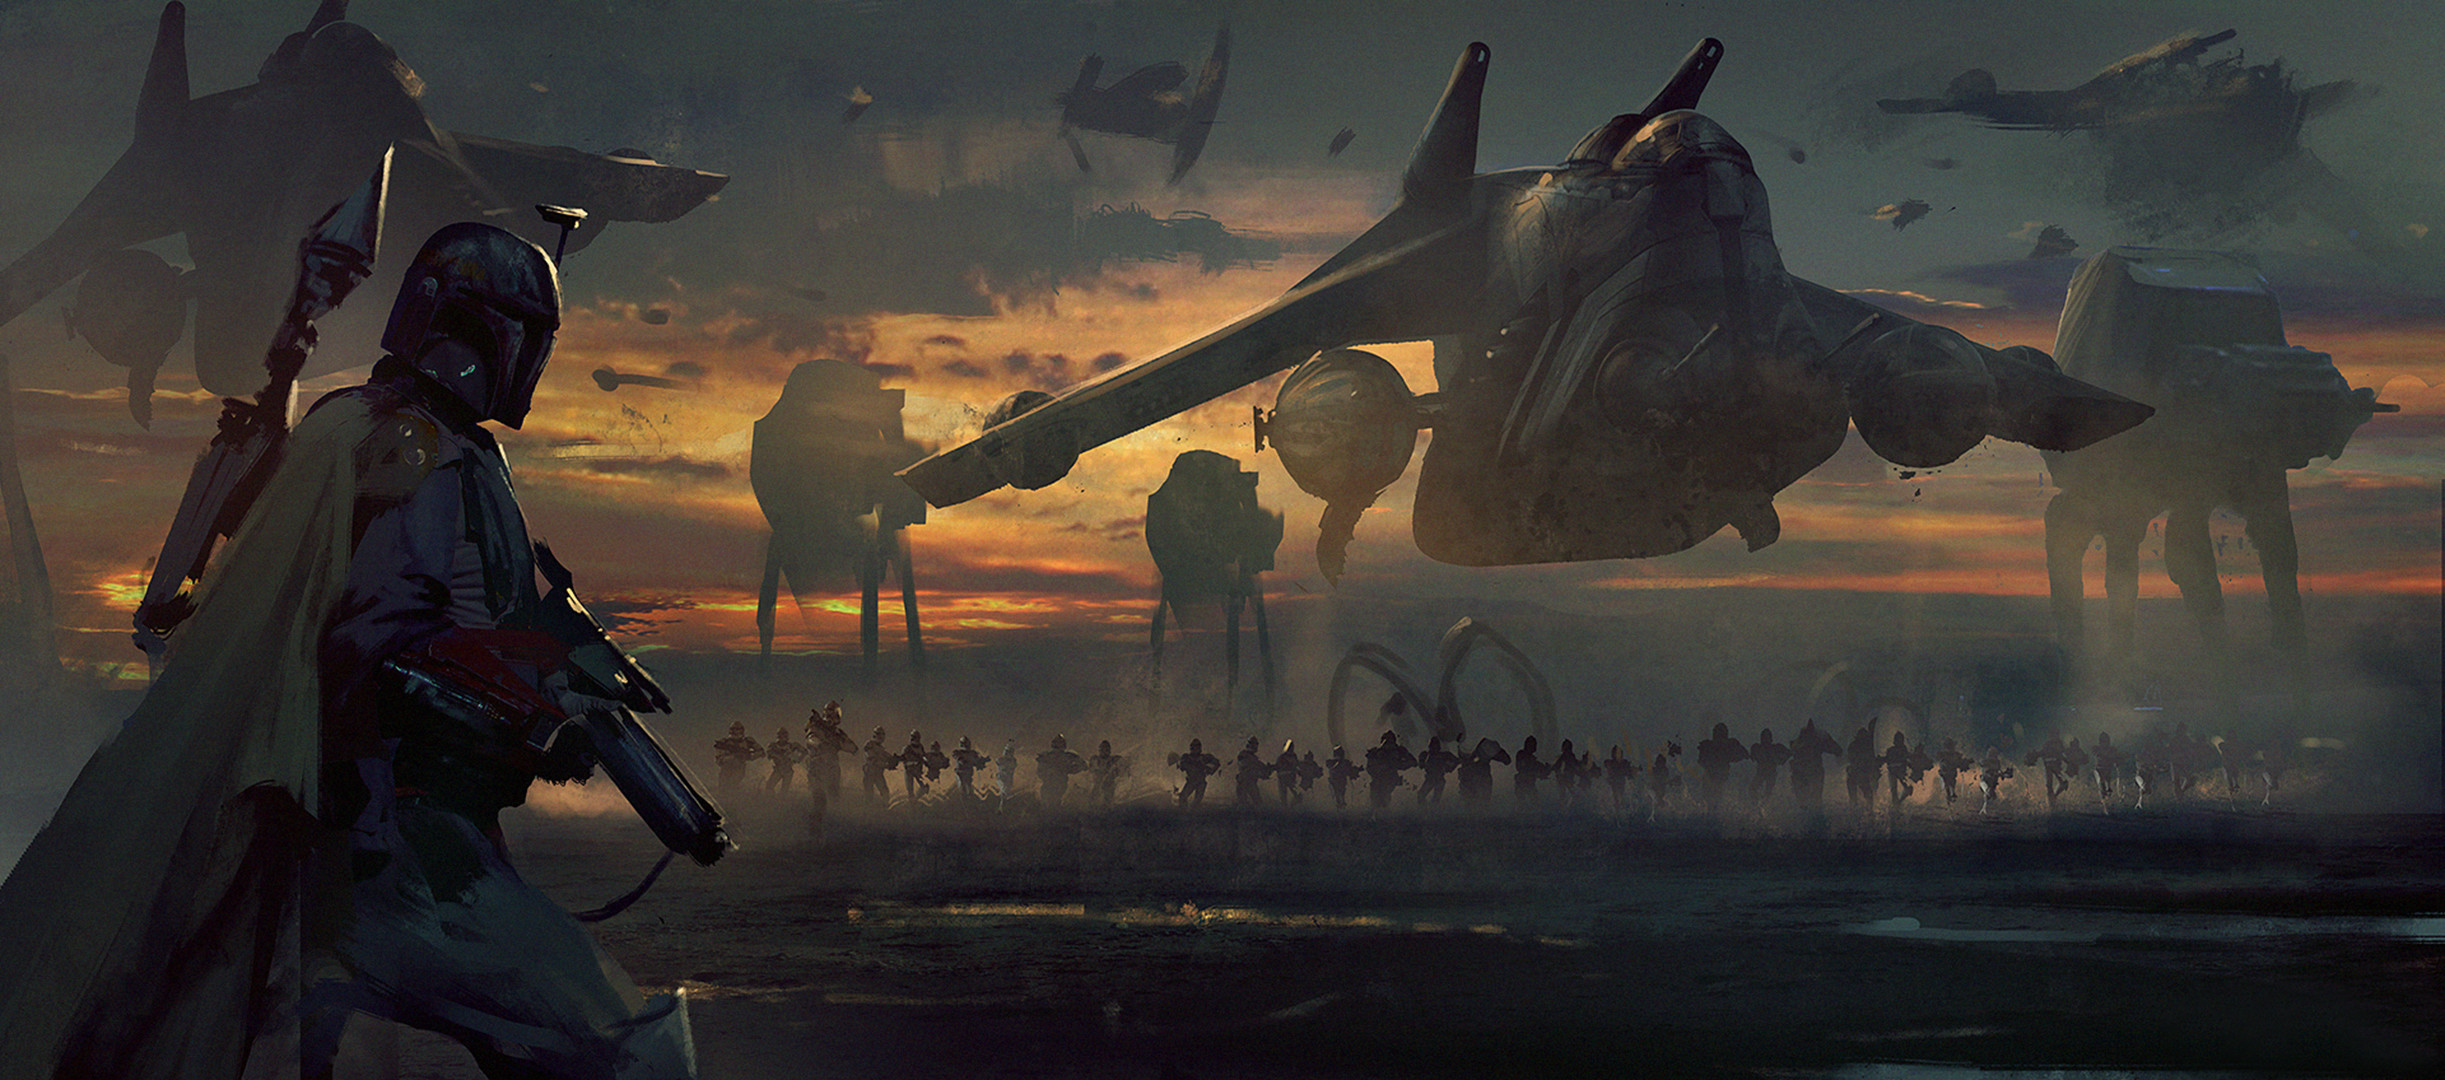 Box cover art done for Between The Shadows expansion set for Star Wars LCG